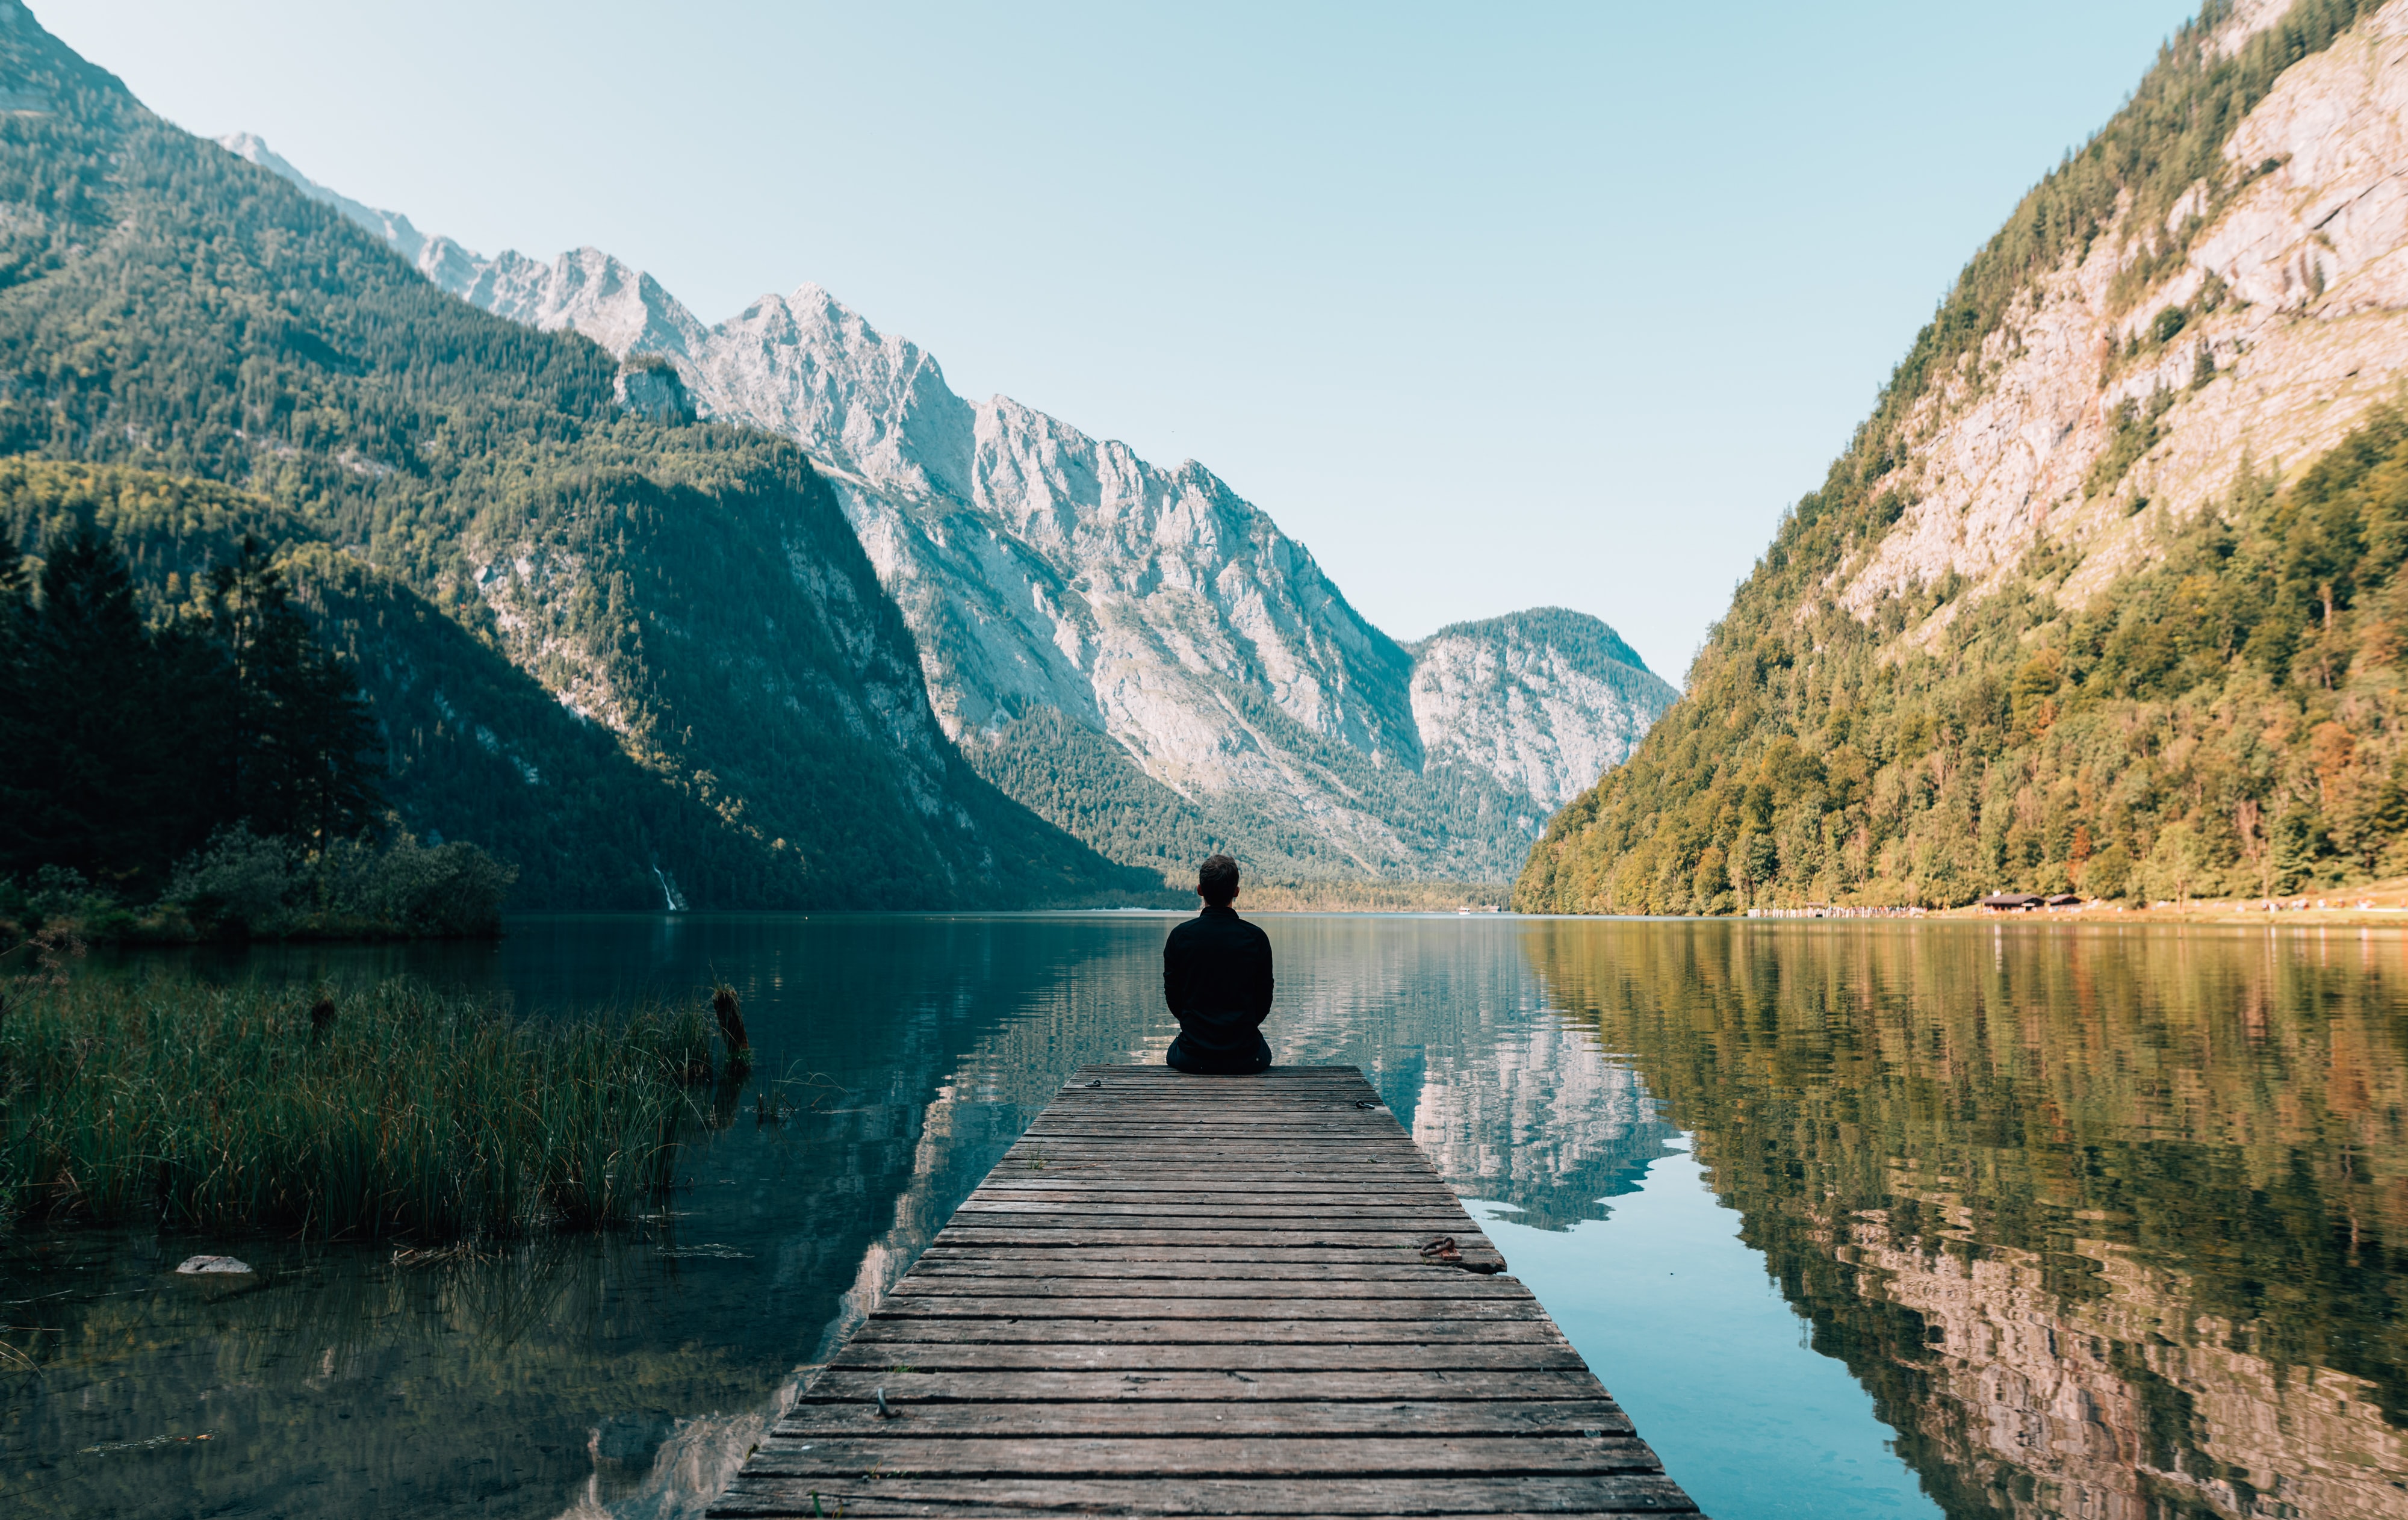 A person sitting on a dock by a lake in the mountains